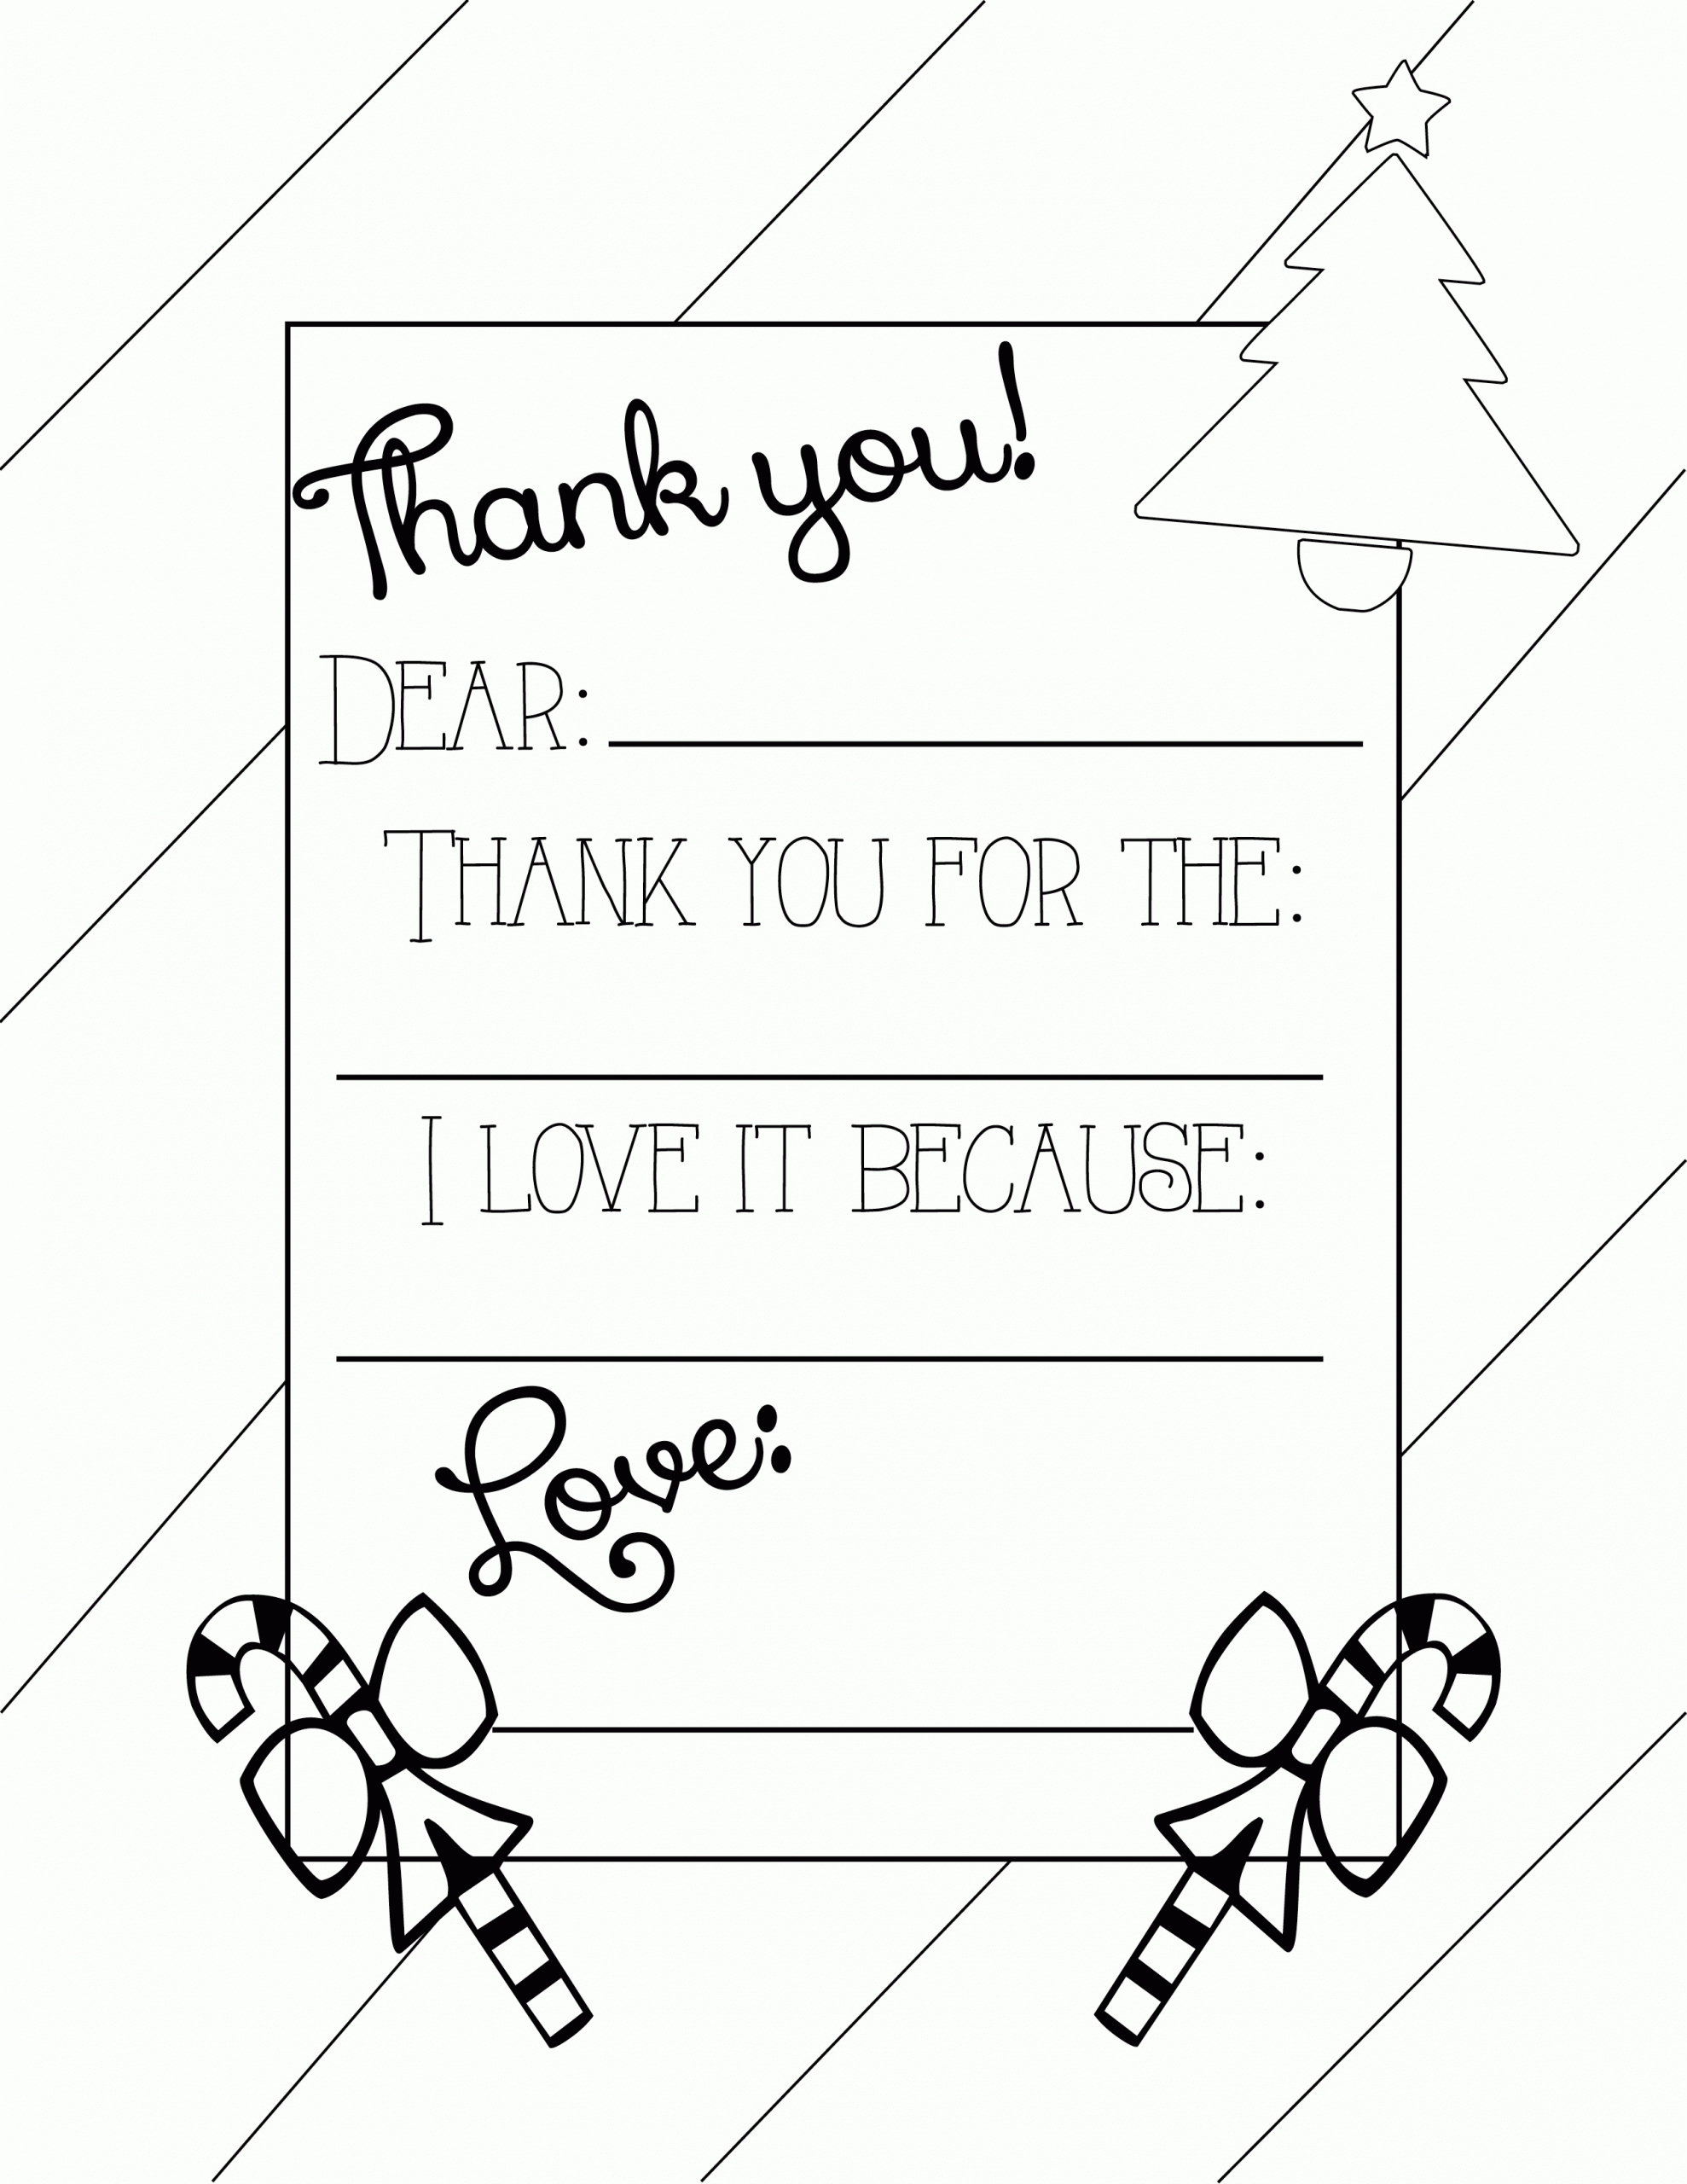 Lets Coloring Printable Pages Thank You Cards Free Teacher With Thank You Card For Teacher Template